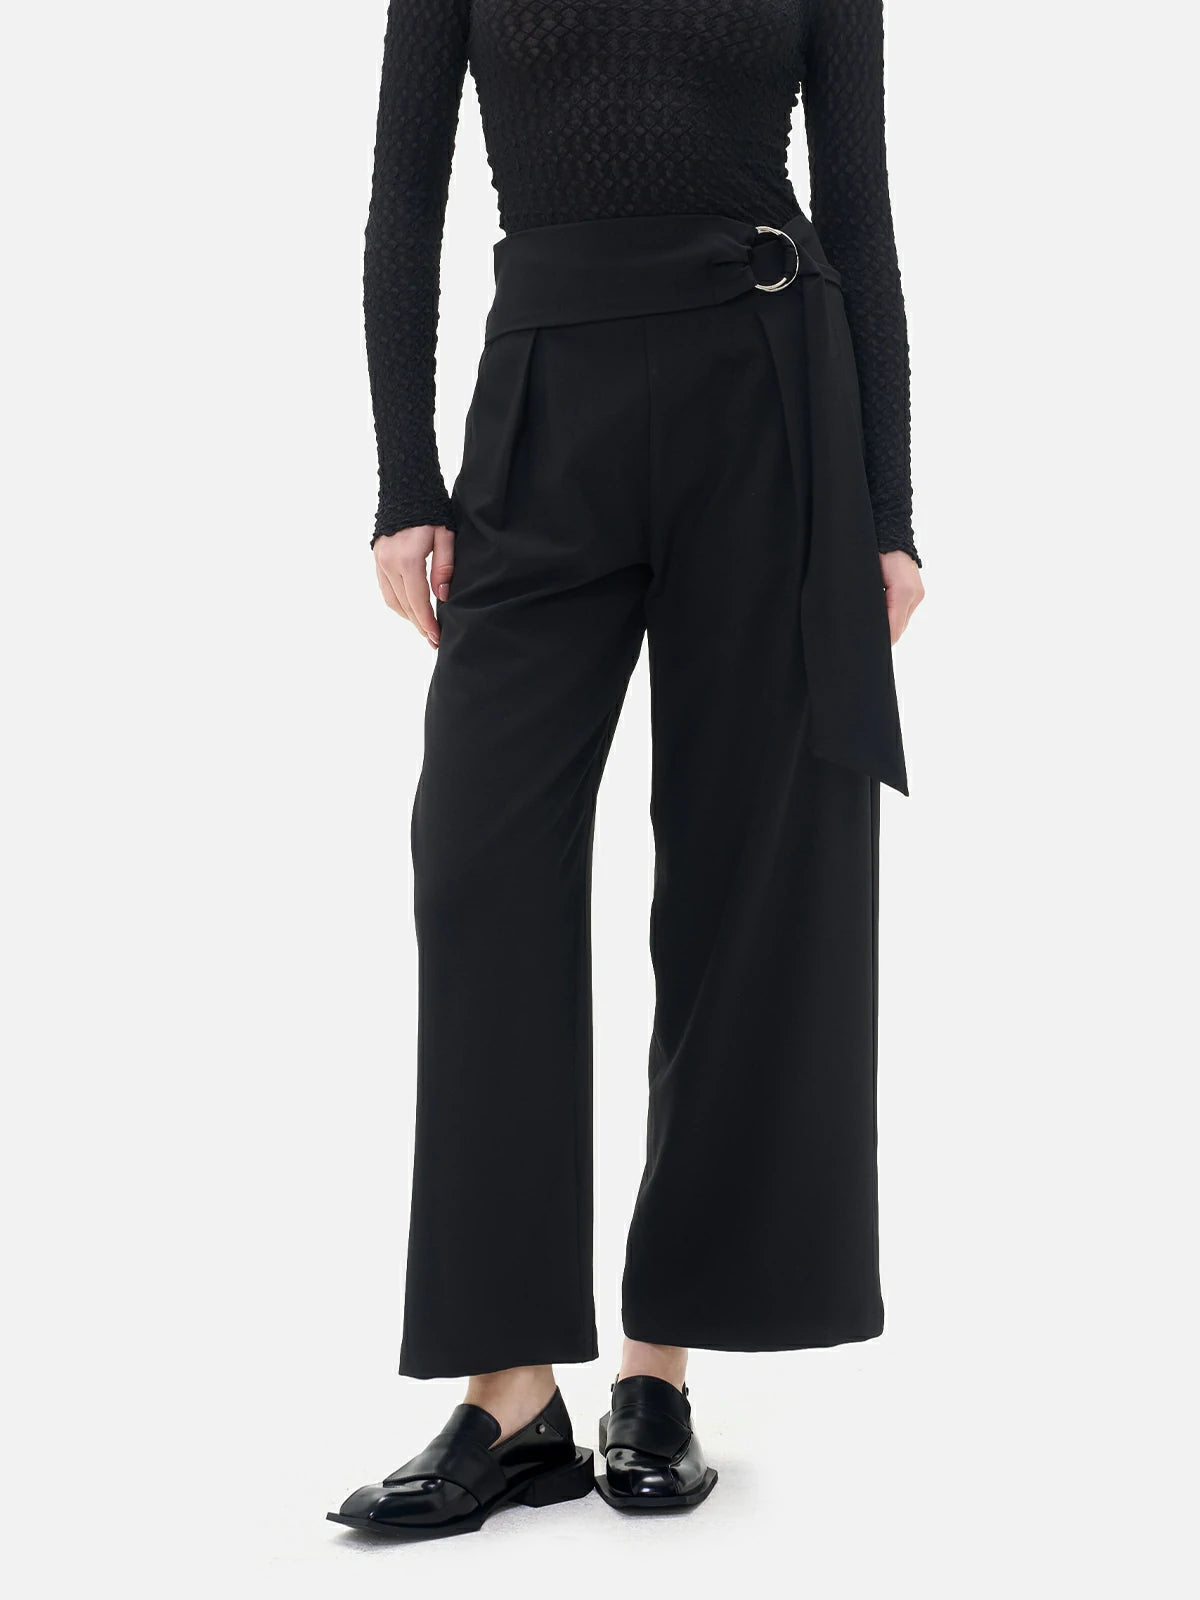 Versatile belt trousers suitable for casual or formal occasions